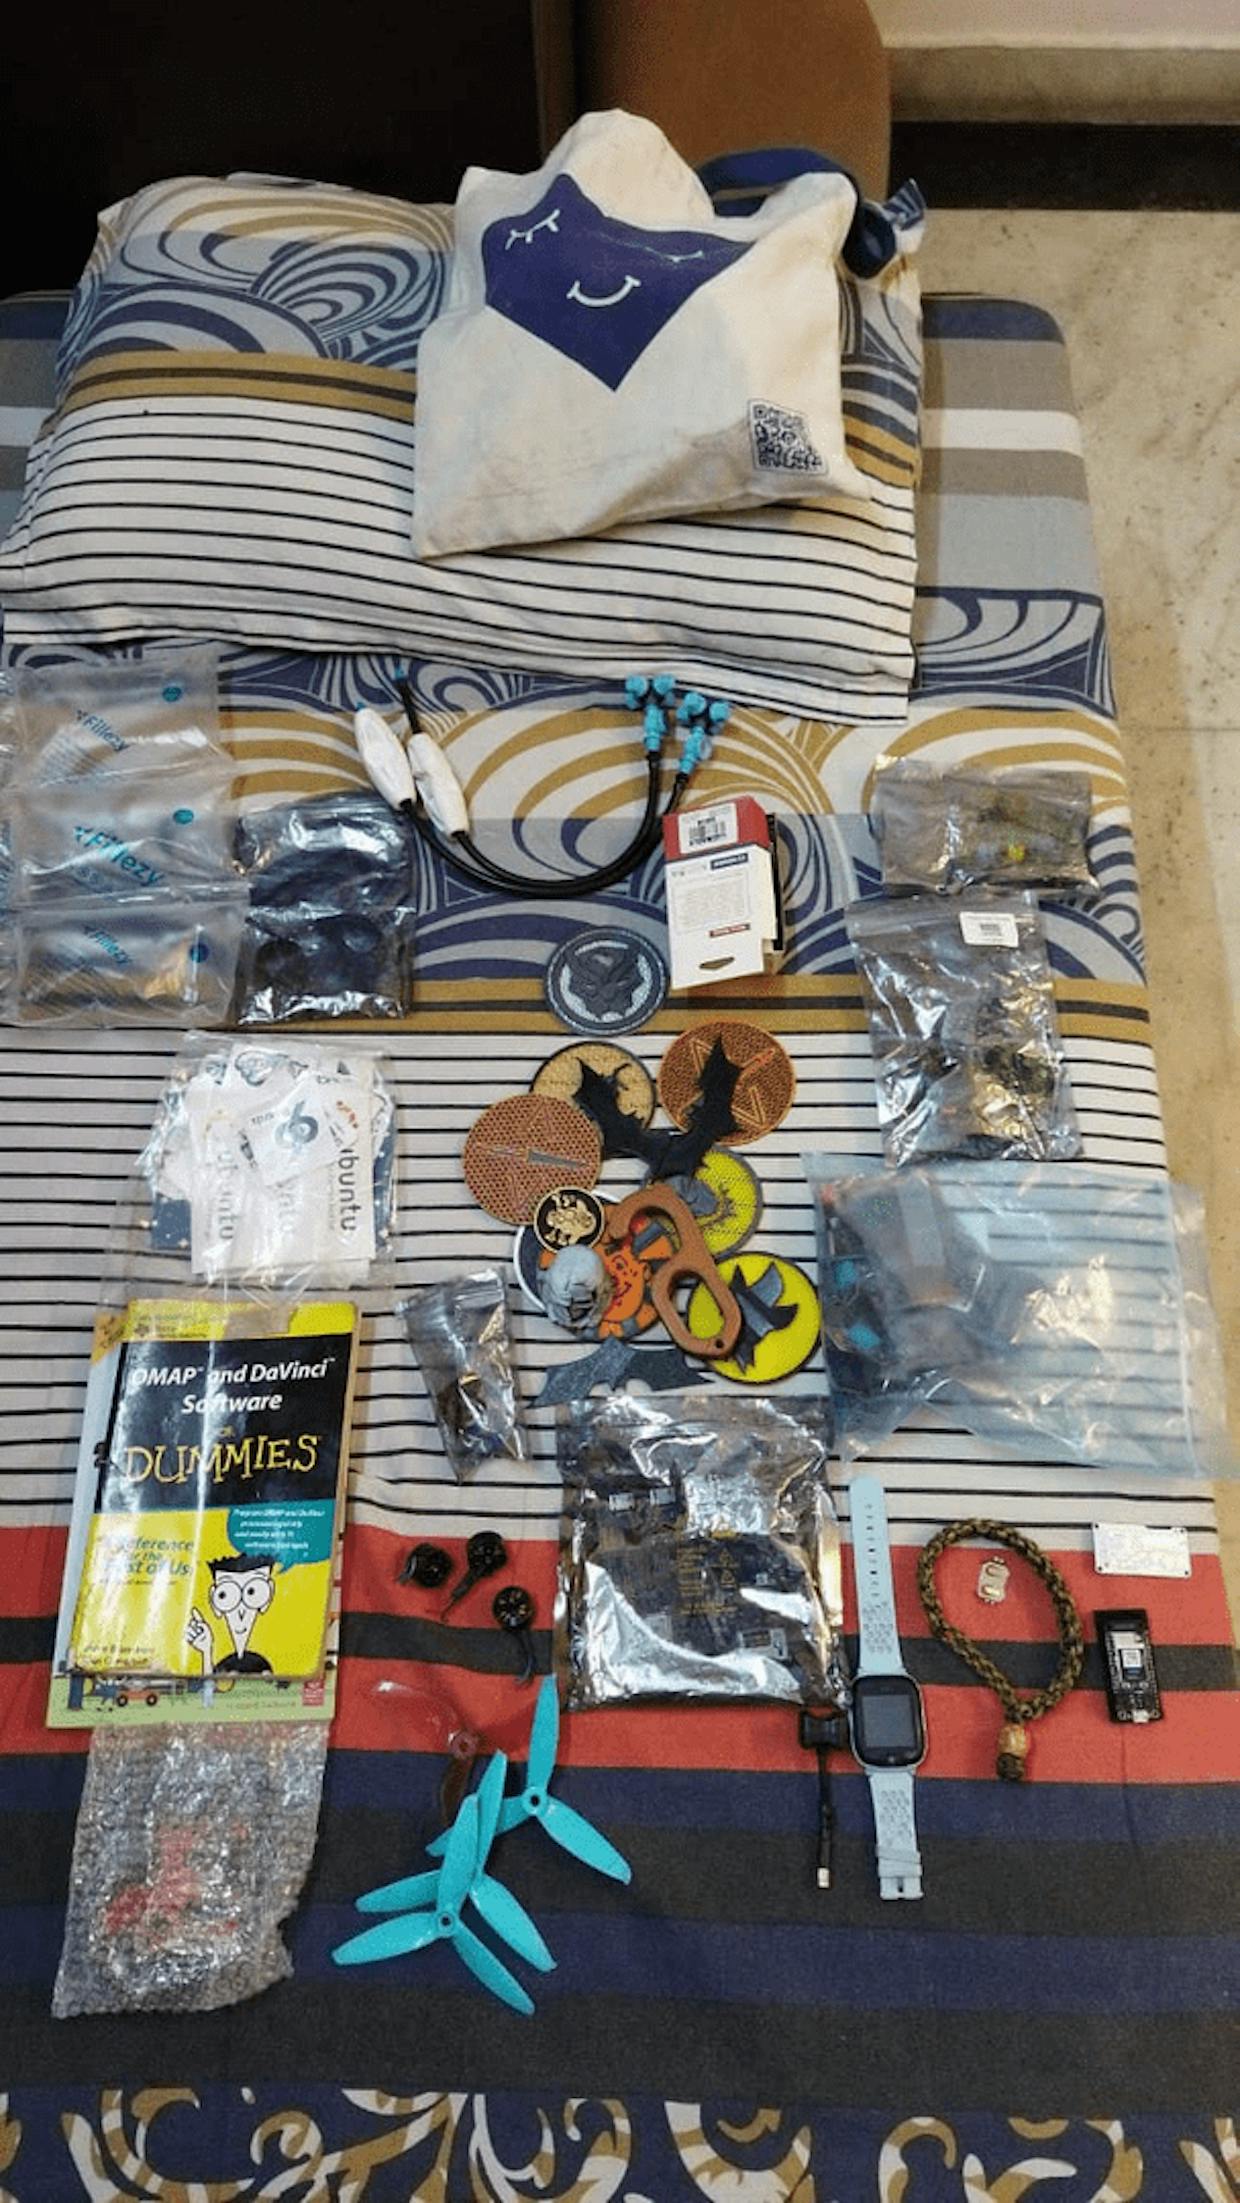 All parts received in the Travelling Maker's box